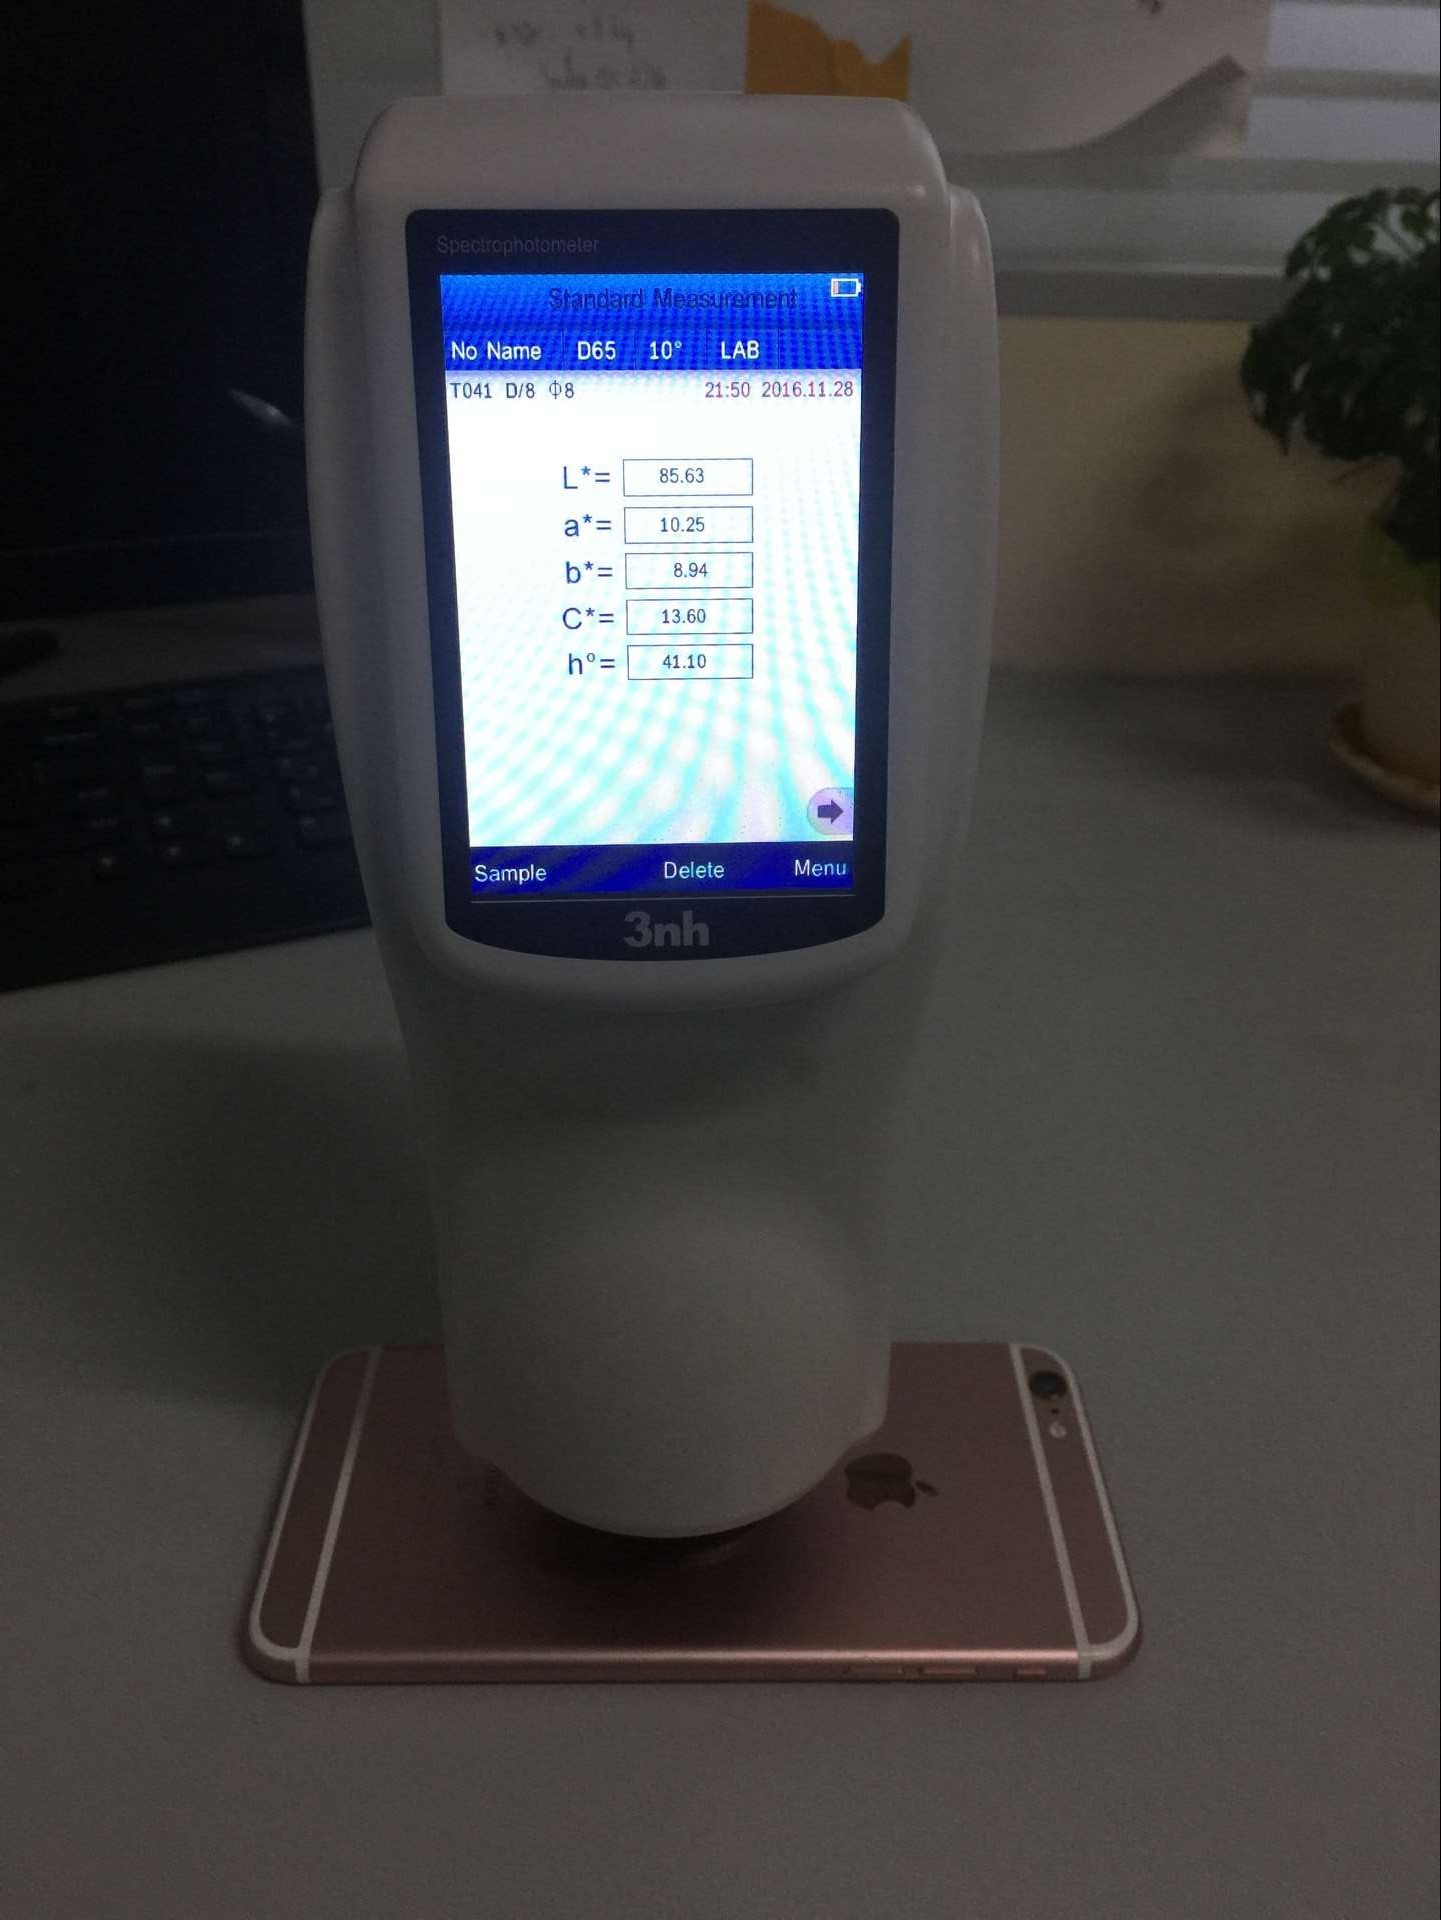 China brand 3nh 45/0 NS800 spectrophotometer with SCE (Specular Component Excluded) for glossy foil color difference